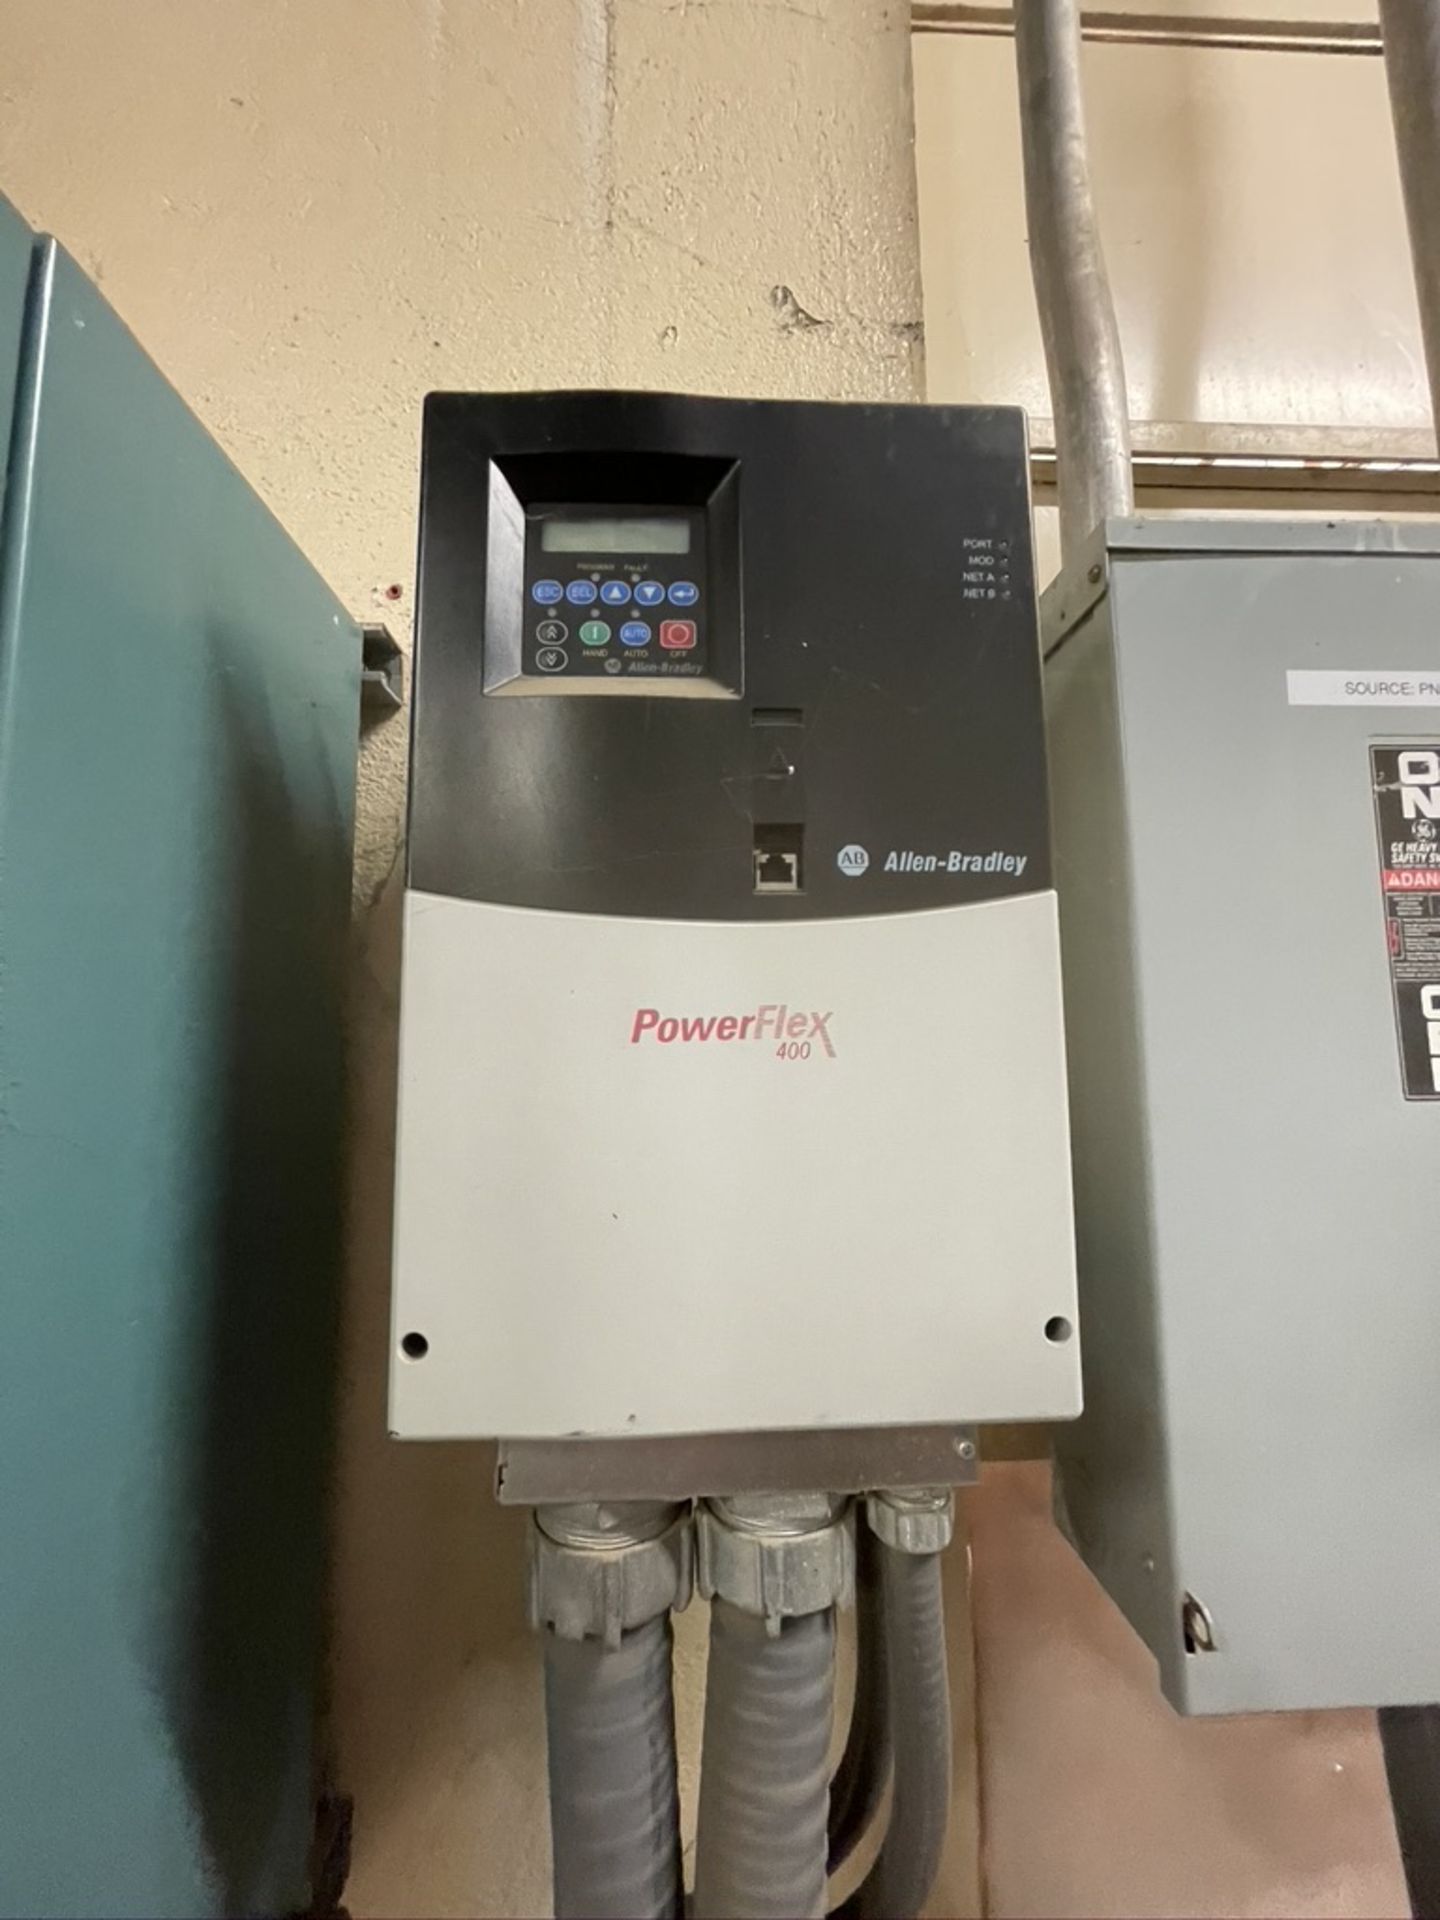 JOHNSON HORIZONTAL NATURAL GAS BOILER, CAT NO. 528-AHG, S/N S-4604, 1,000 BTU/FT3, WITH ALLEN- - Image 21 of 33